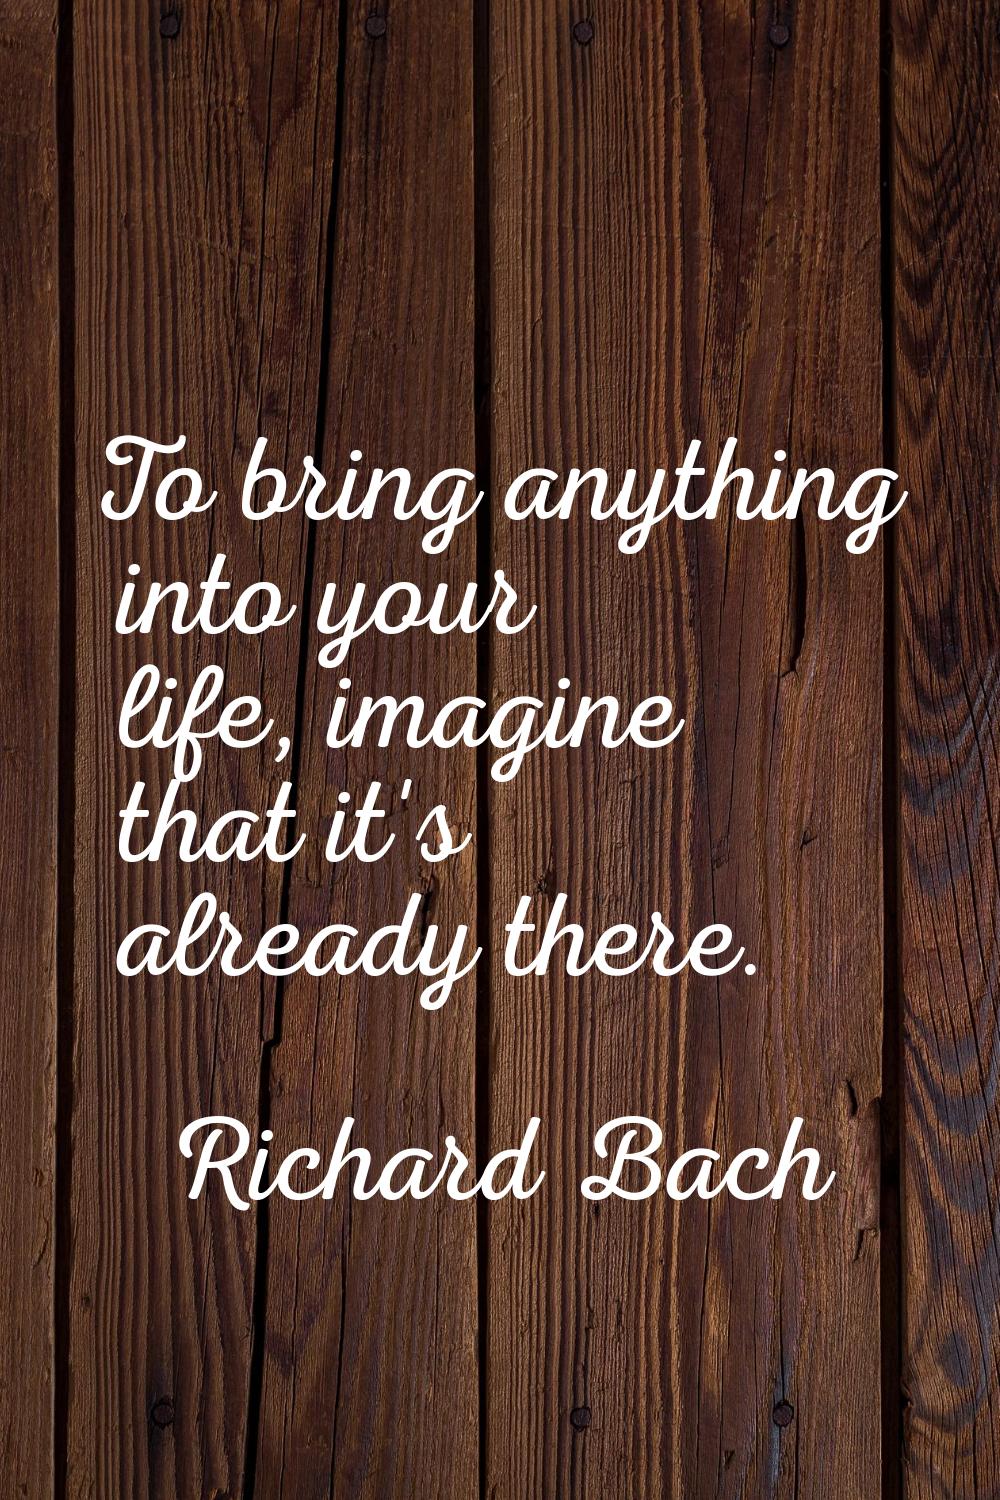 To bring anything into your life, imagine that it's already there.